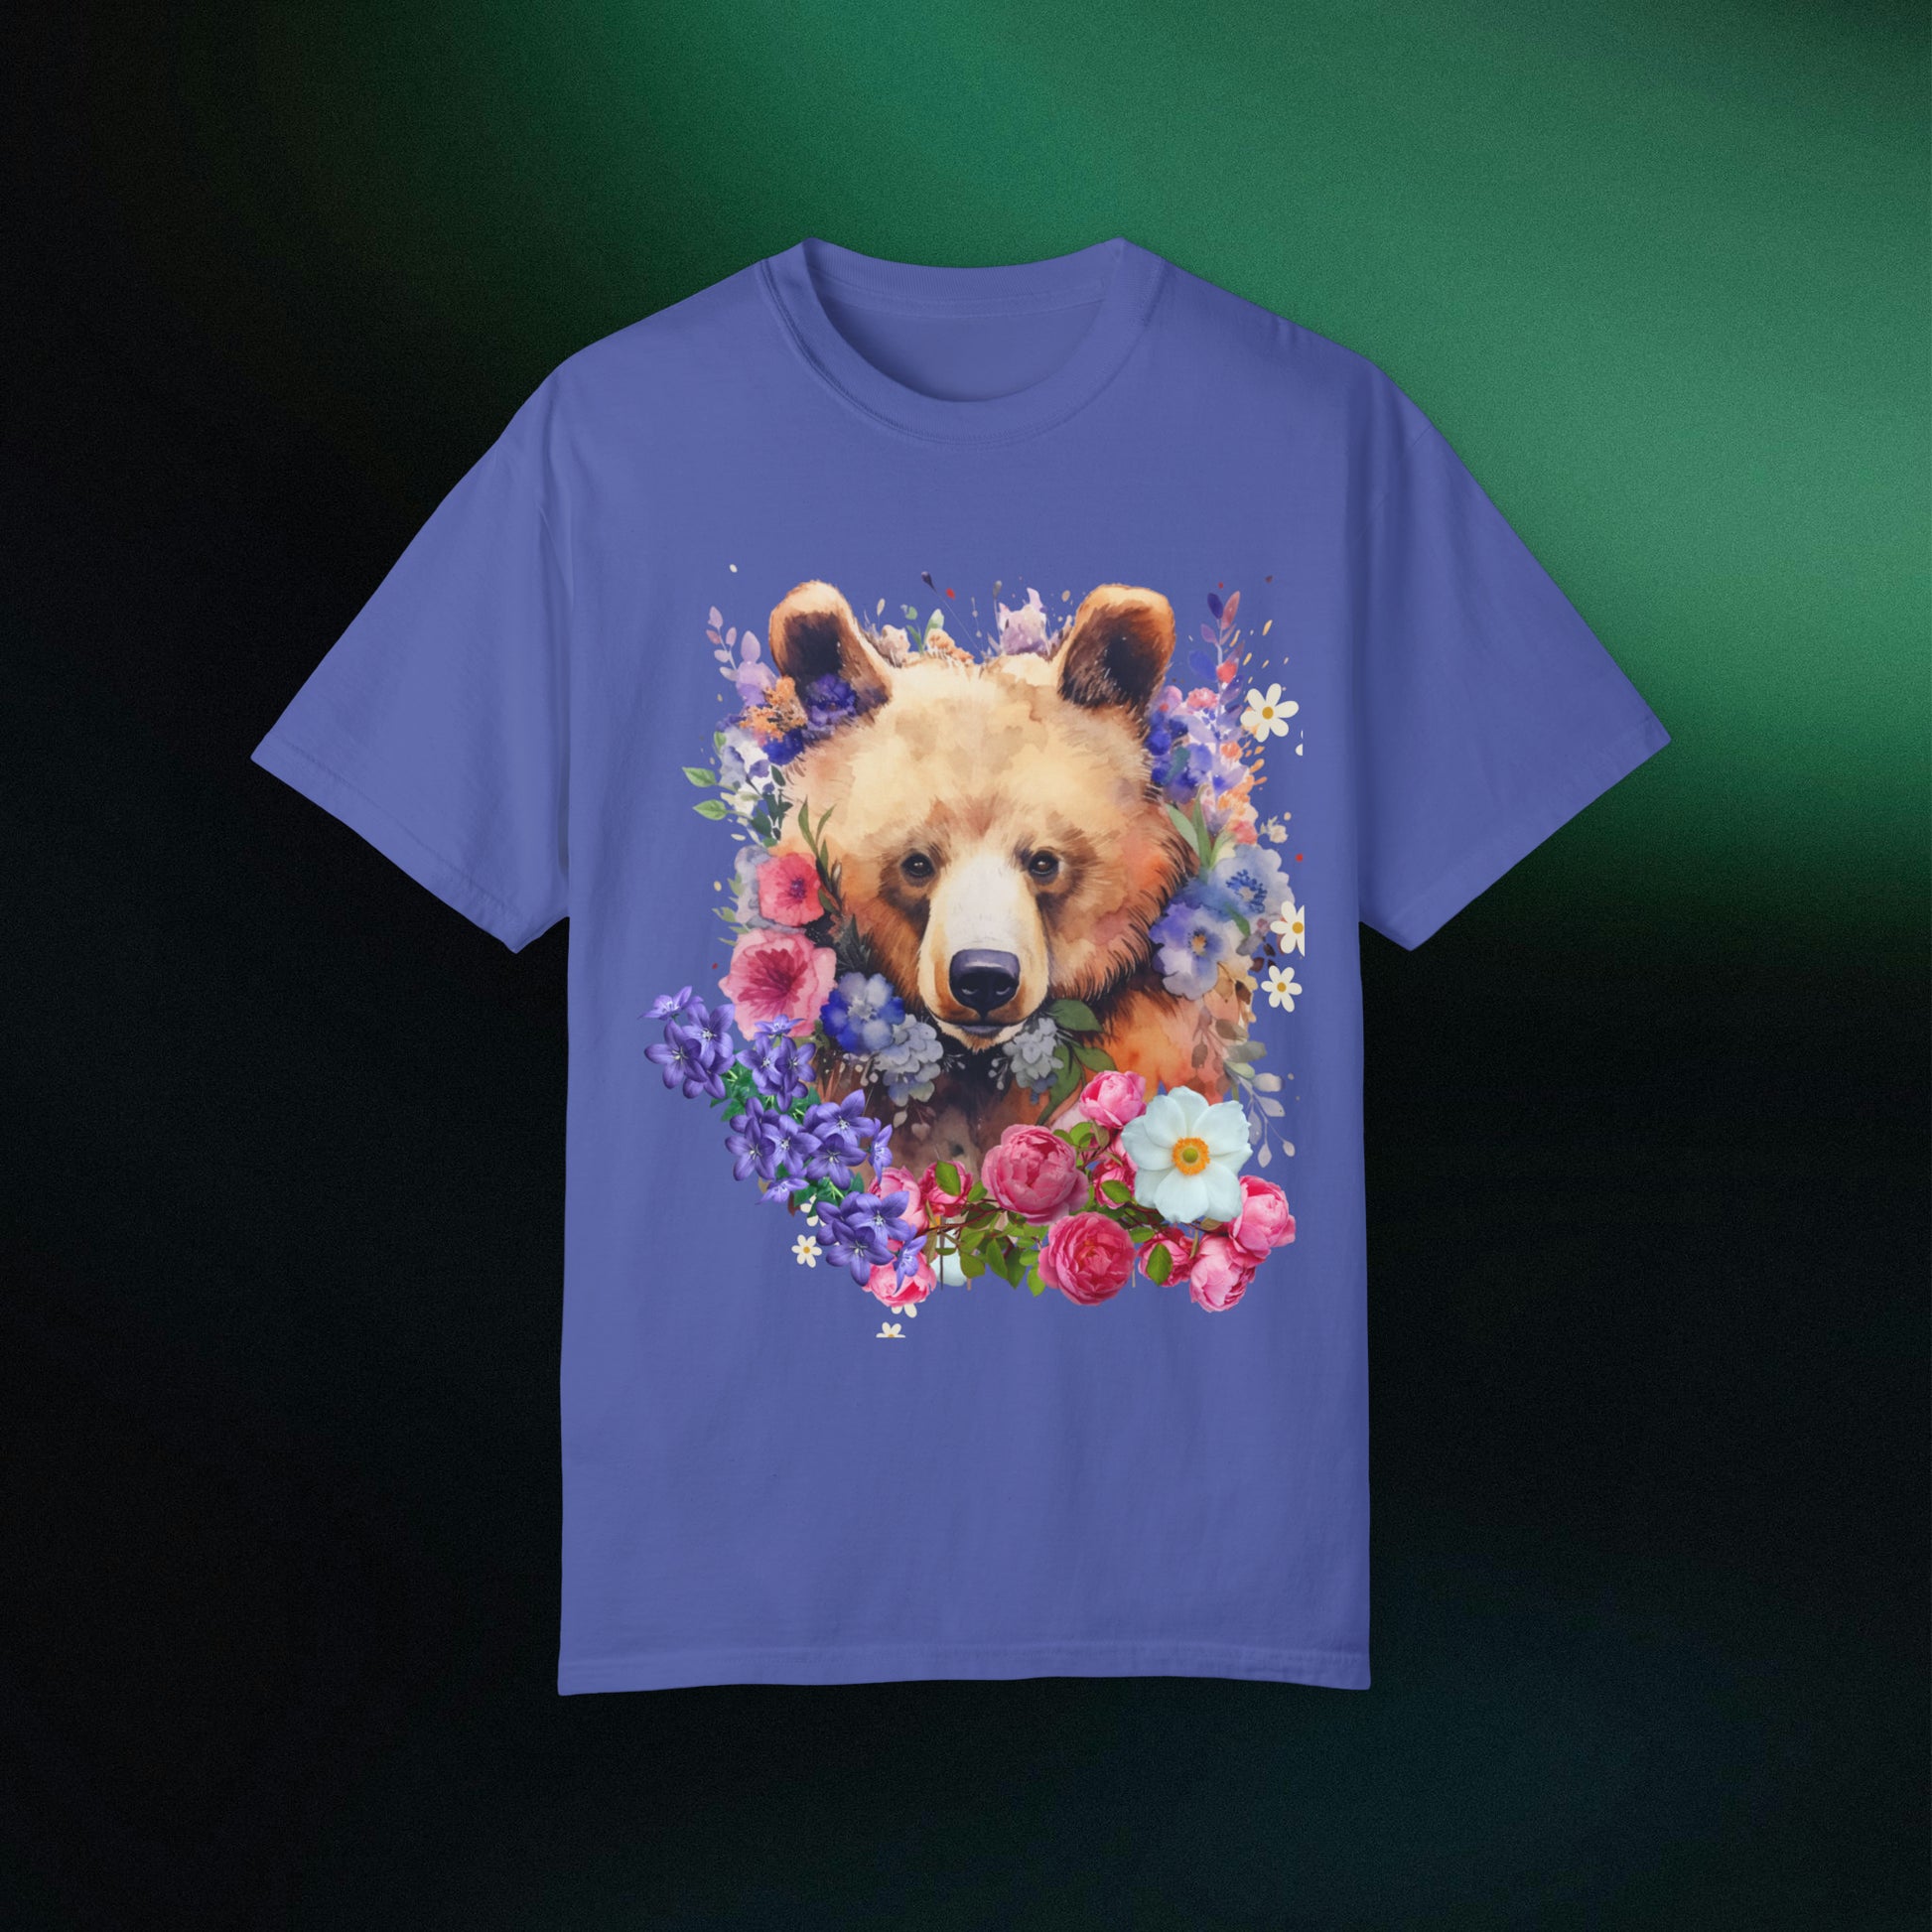 Floral Bear Shirt, Bear Shirt, Floral Bear Tee, Flower Bear Shirt, Animal Lover Tee, Bear Shirt, Bear Lover Gift, Wildlife Animals Tee T-Shirt Periwinkle S 